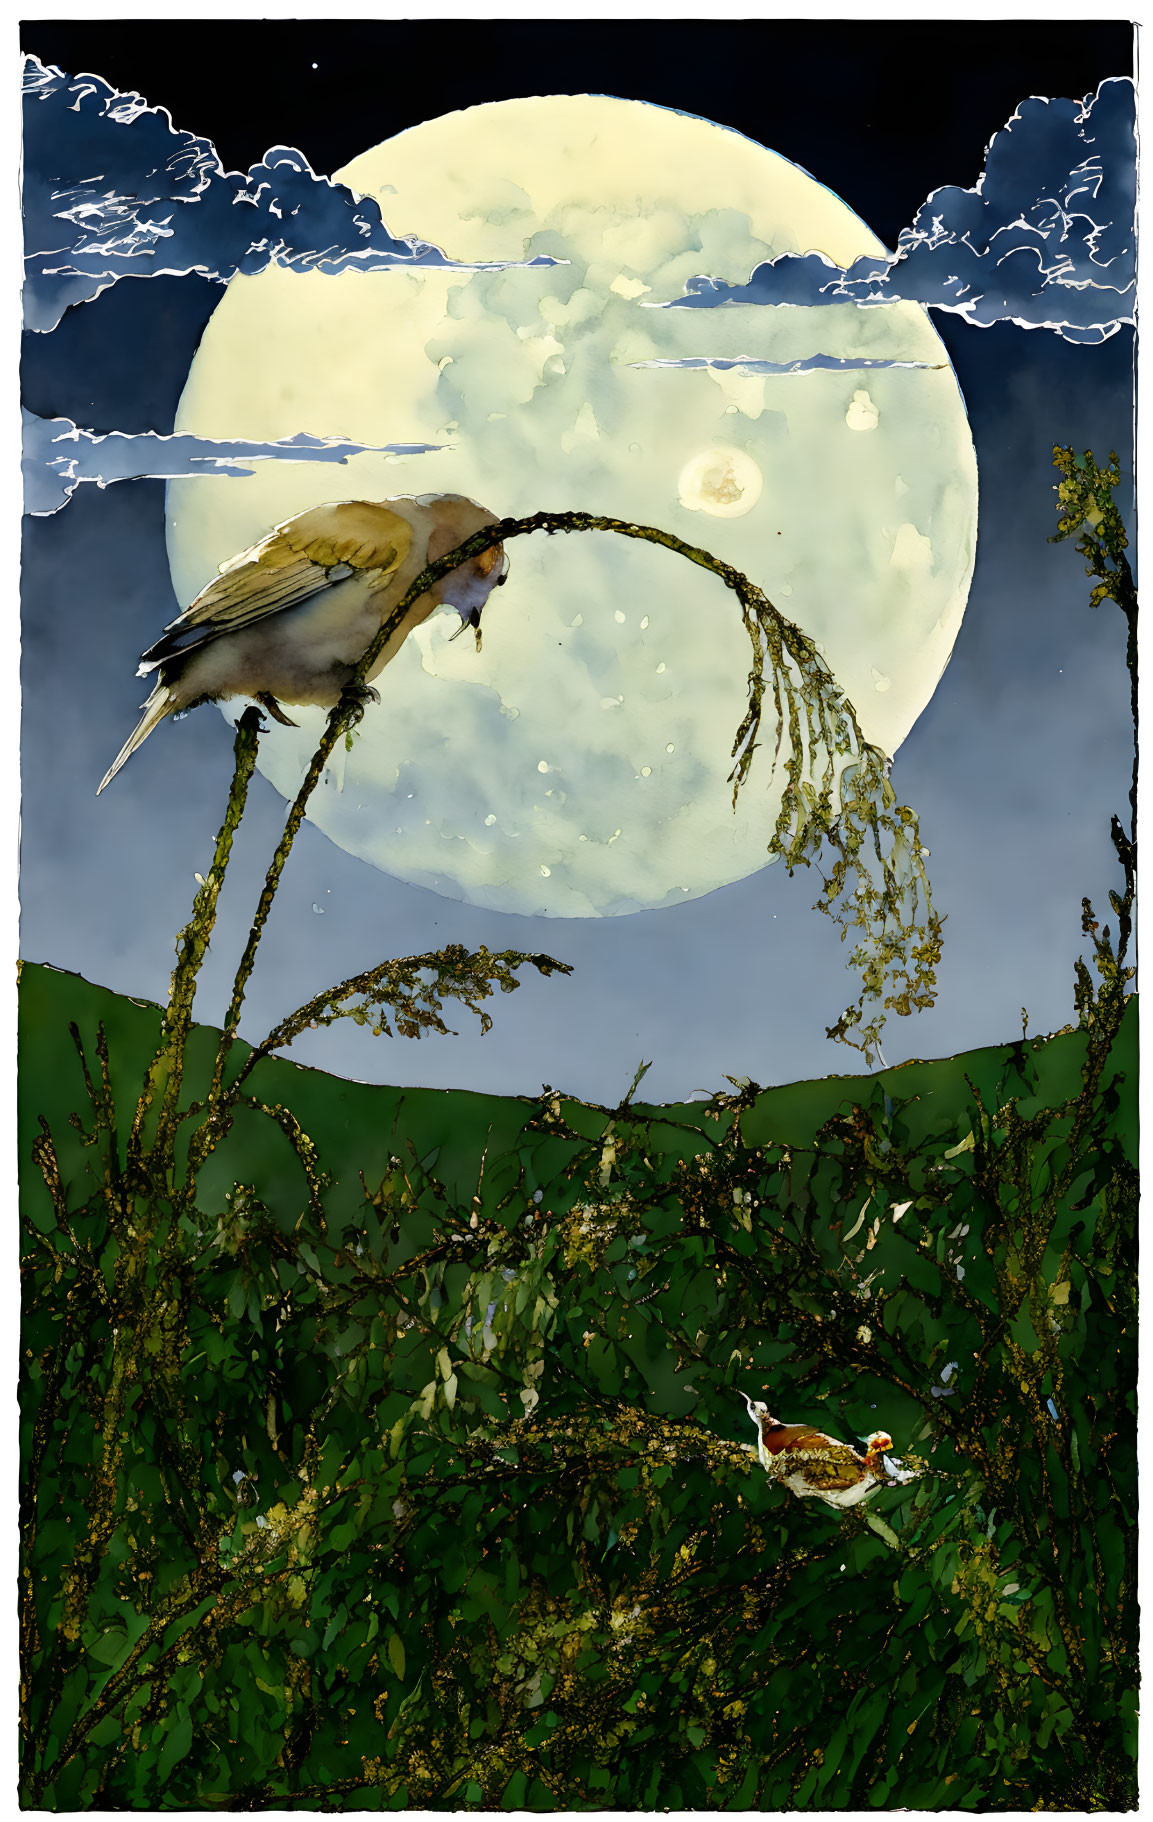 The bird, the grasshopper and the full moon